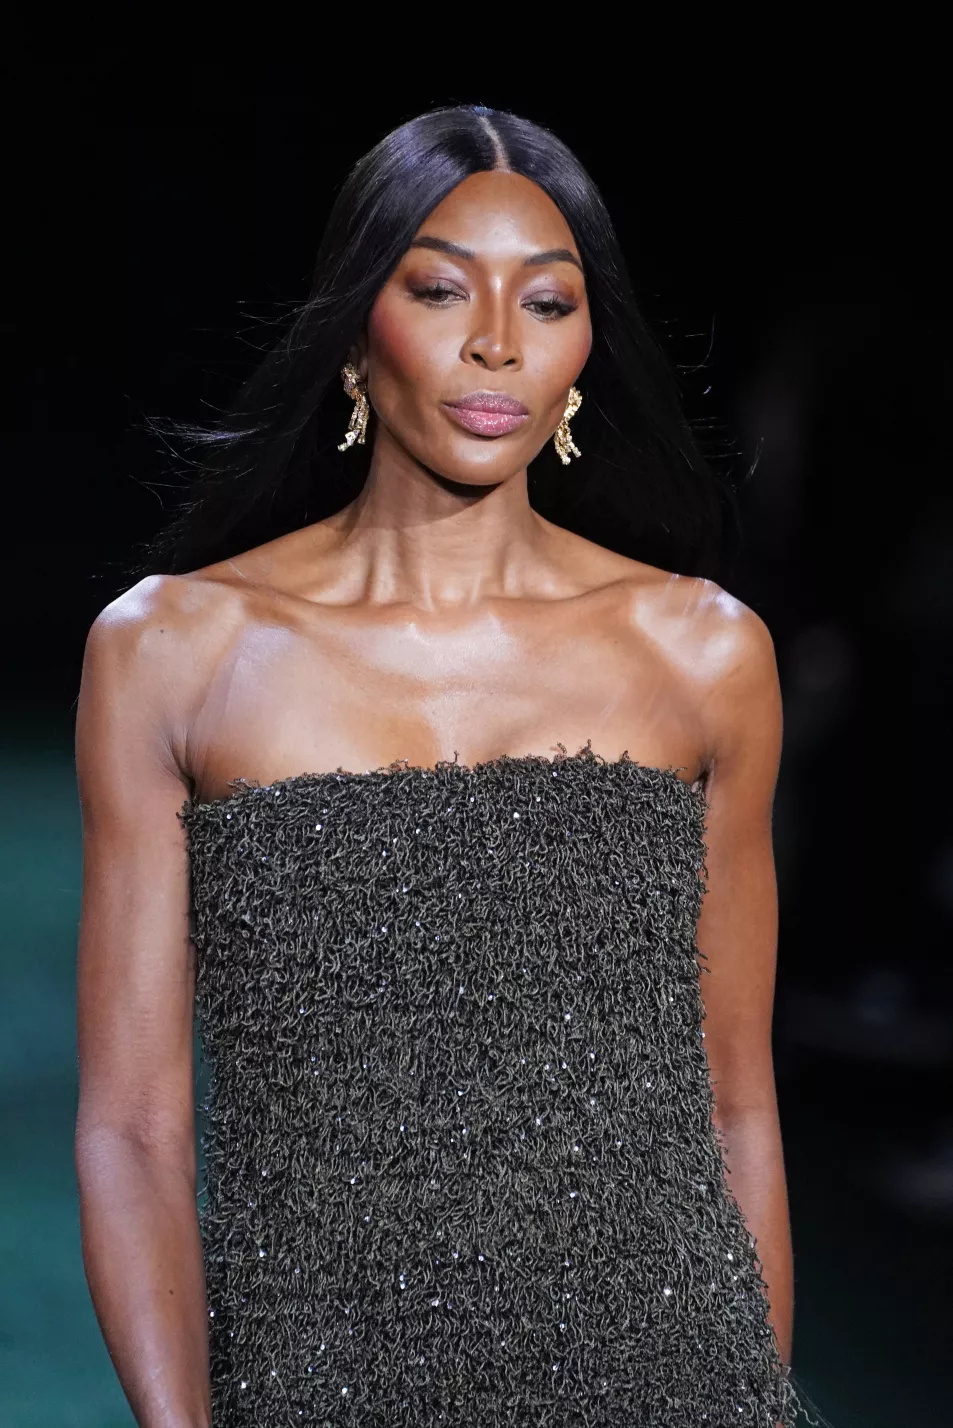 Naomi Campbell dazzles in beaded dress at Burberry’s London Fashion Week show